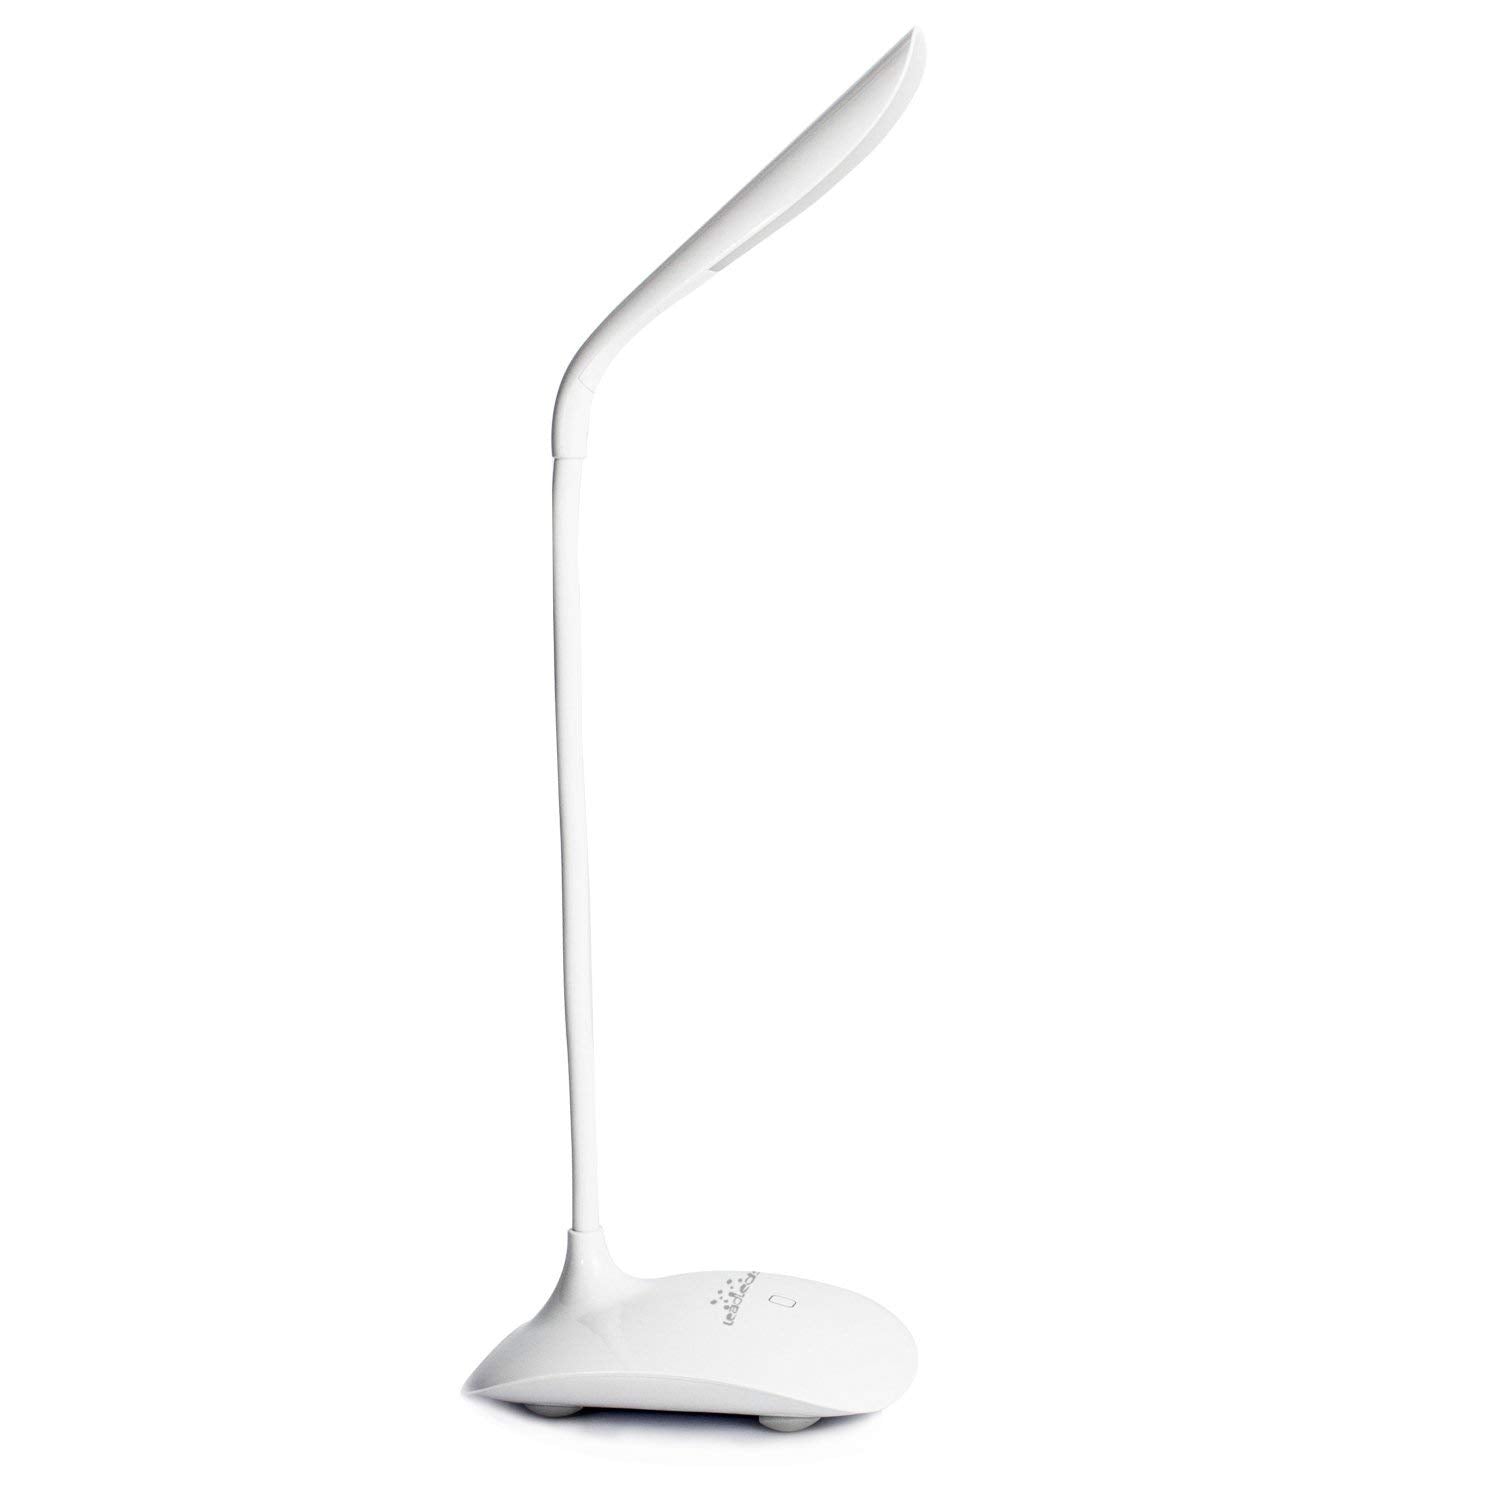 Leadleds Reading Lights Table Lamp Rechargeable Flexible Dimmable 3 Levels Brightness, White - Leadleds